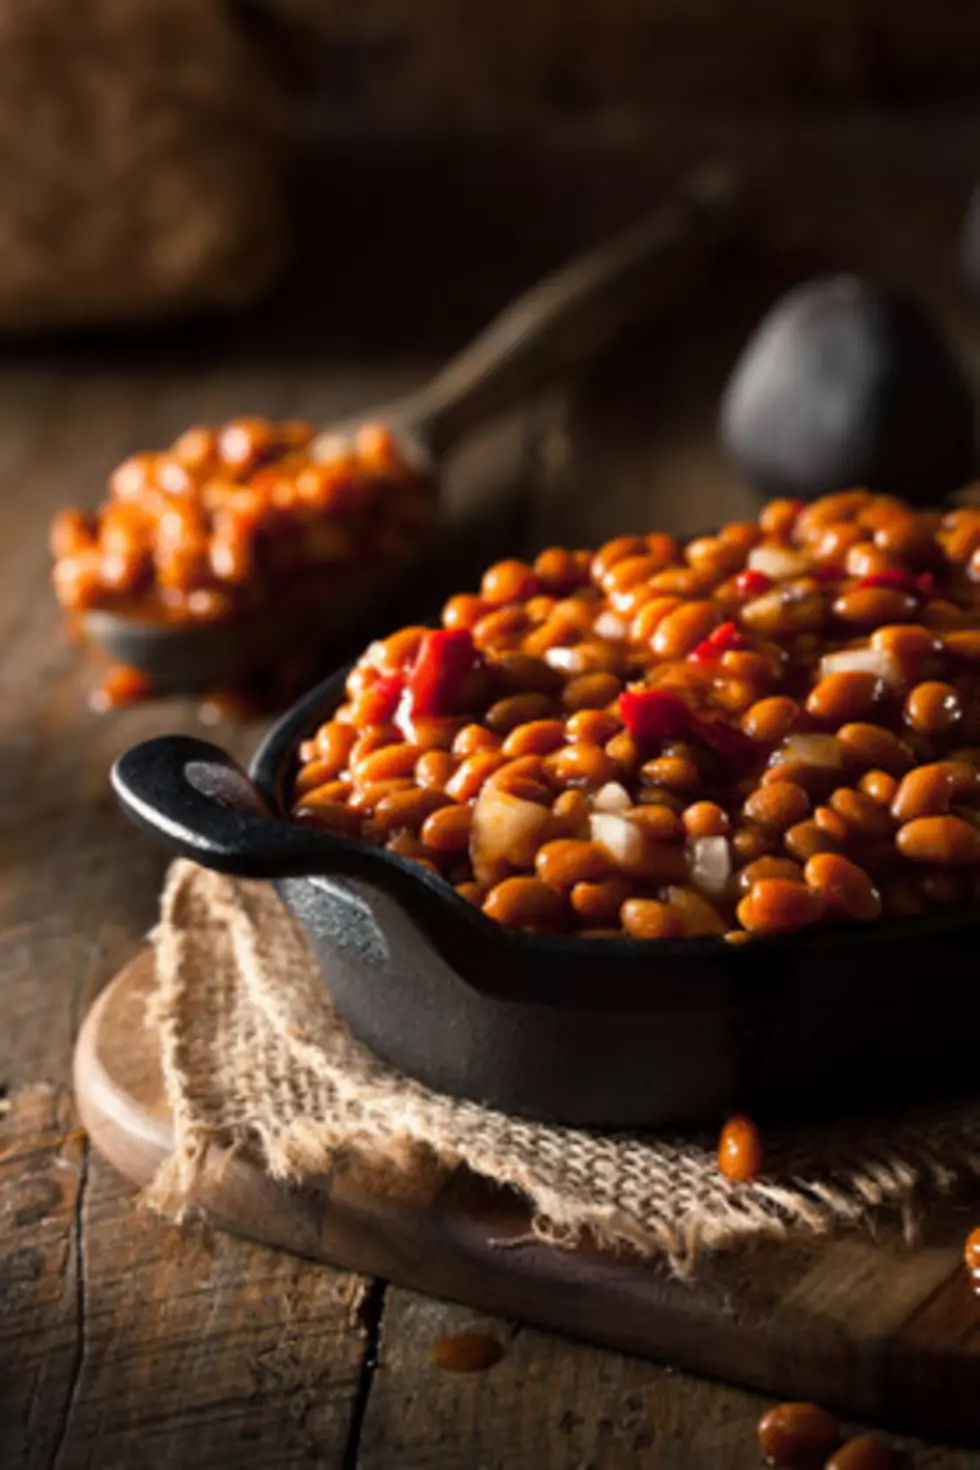 Woman Uses Two Cans Of Baked Beans To Lose Weight